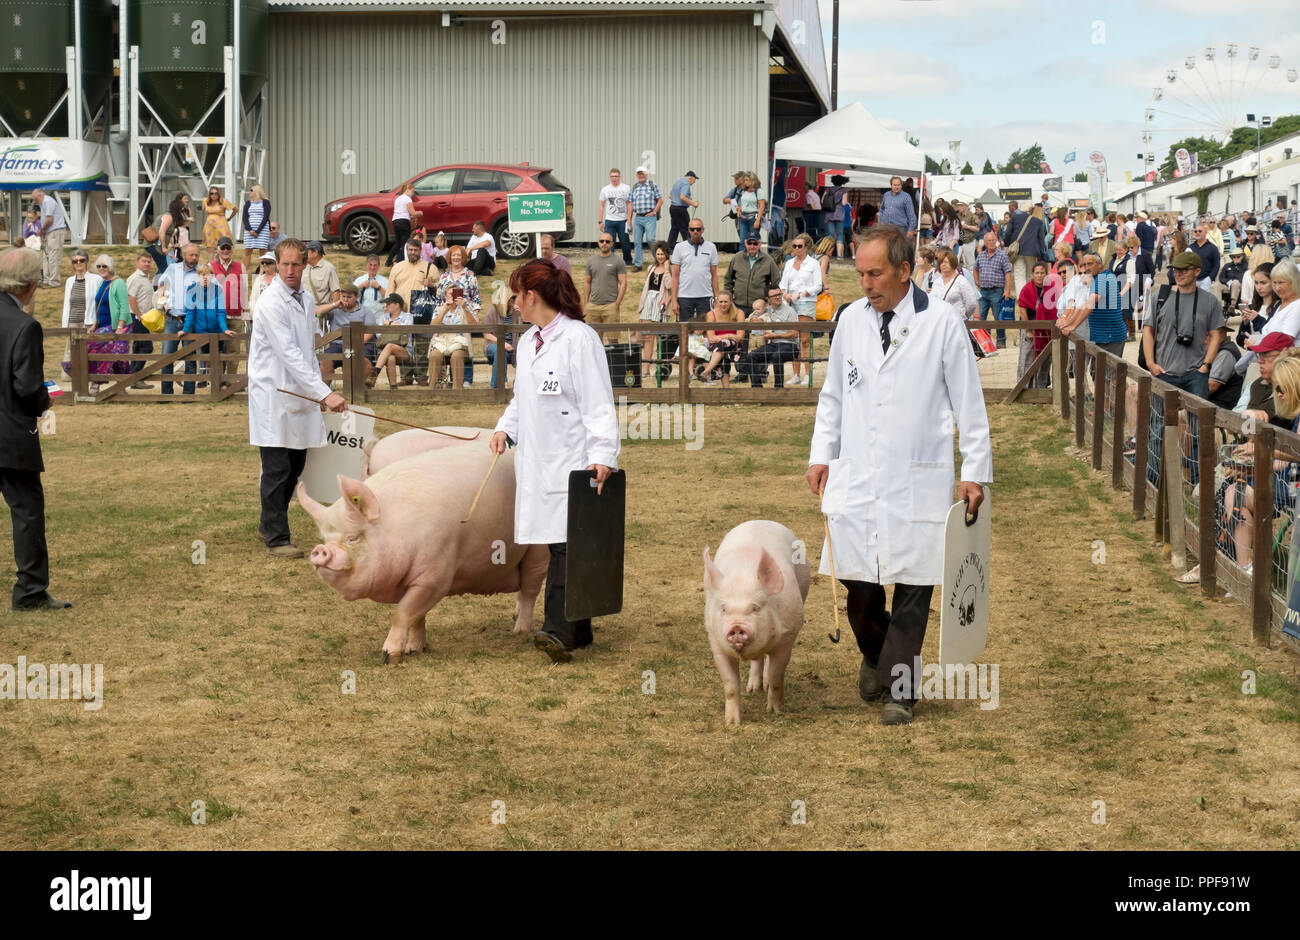 Pig farmers showing pigs being judged Great Yorkshire Show Harrogate North Yorkshire England UK United Kingdom GB Great Britain Stock Photo